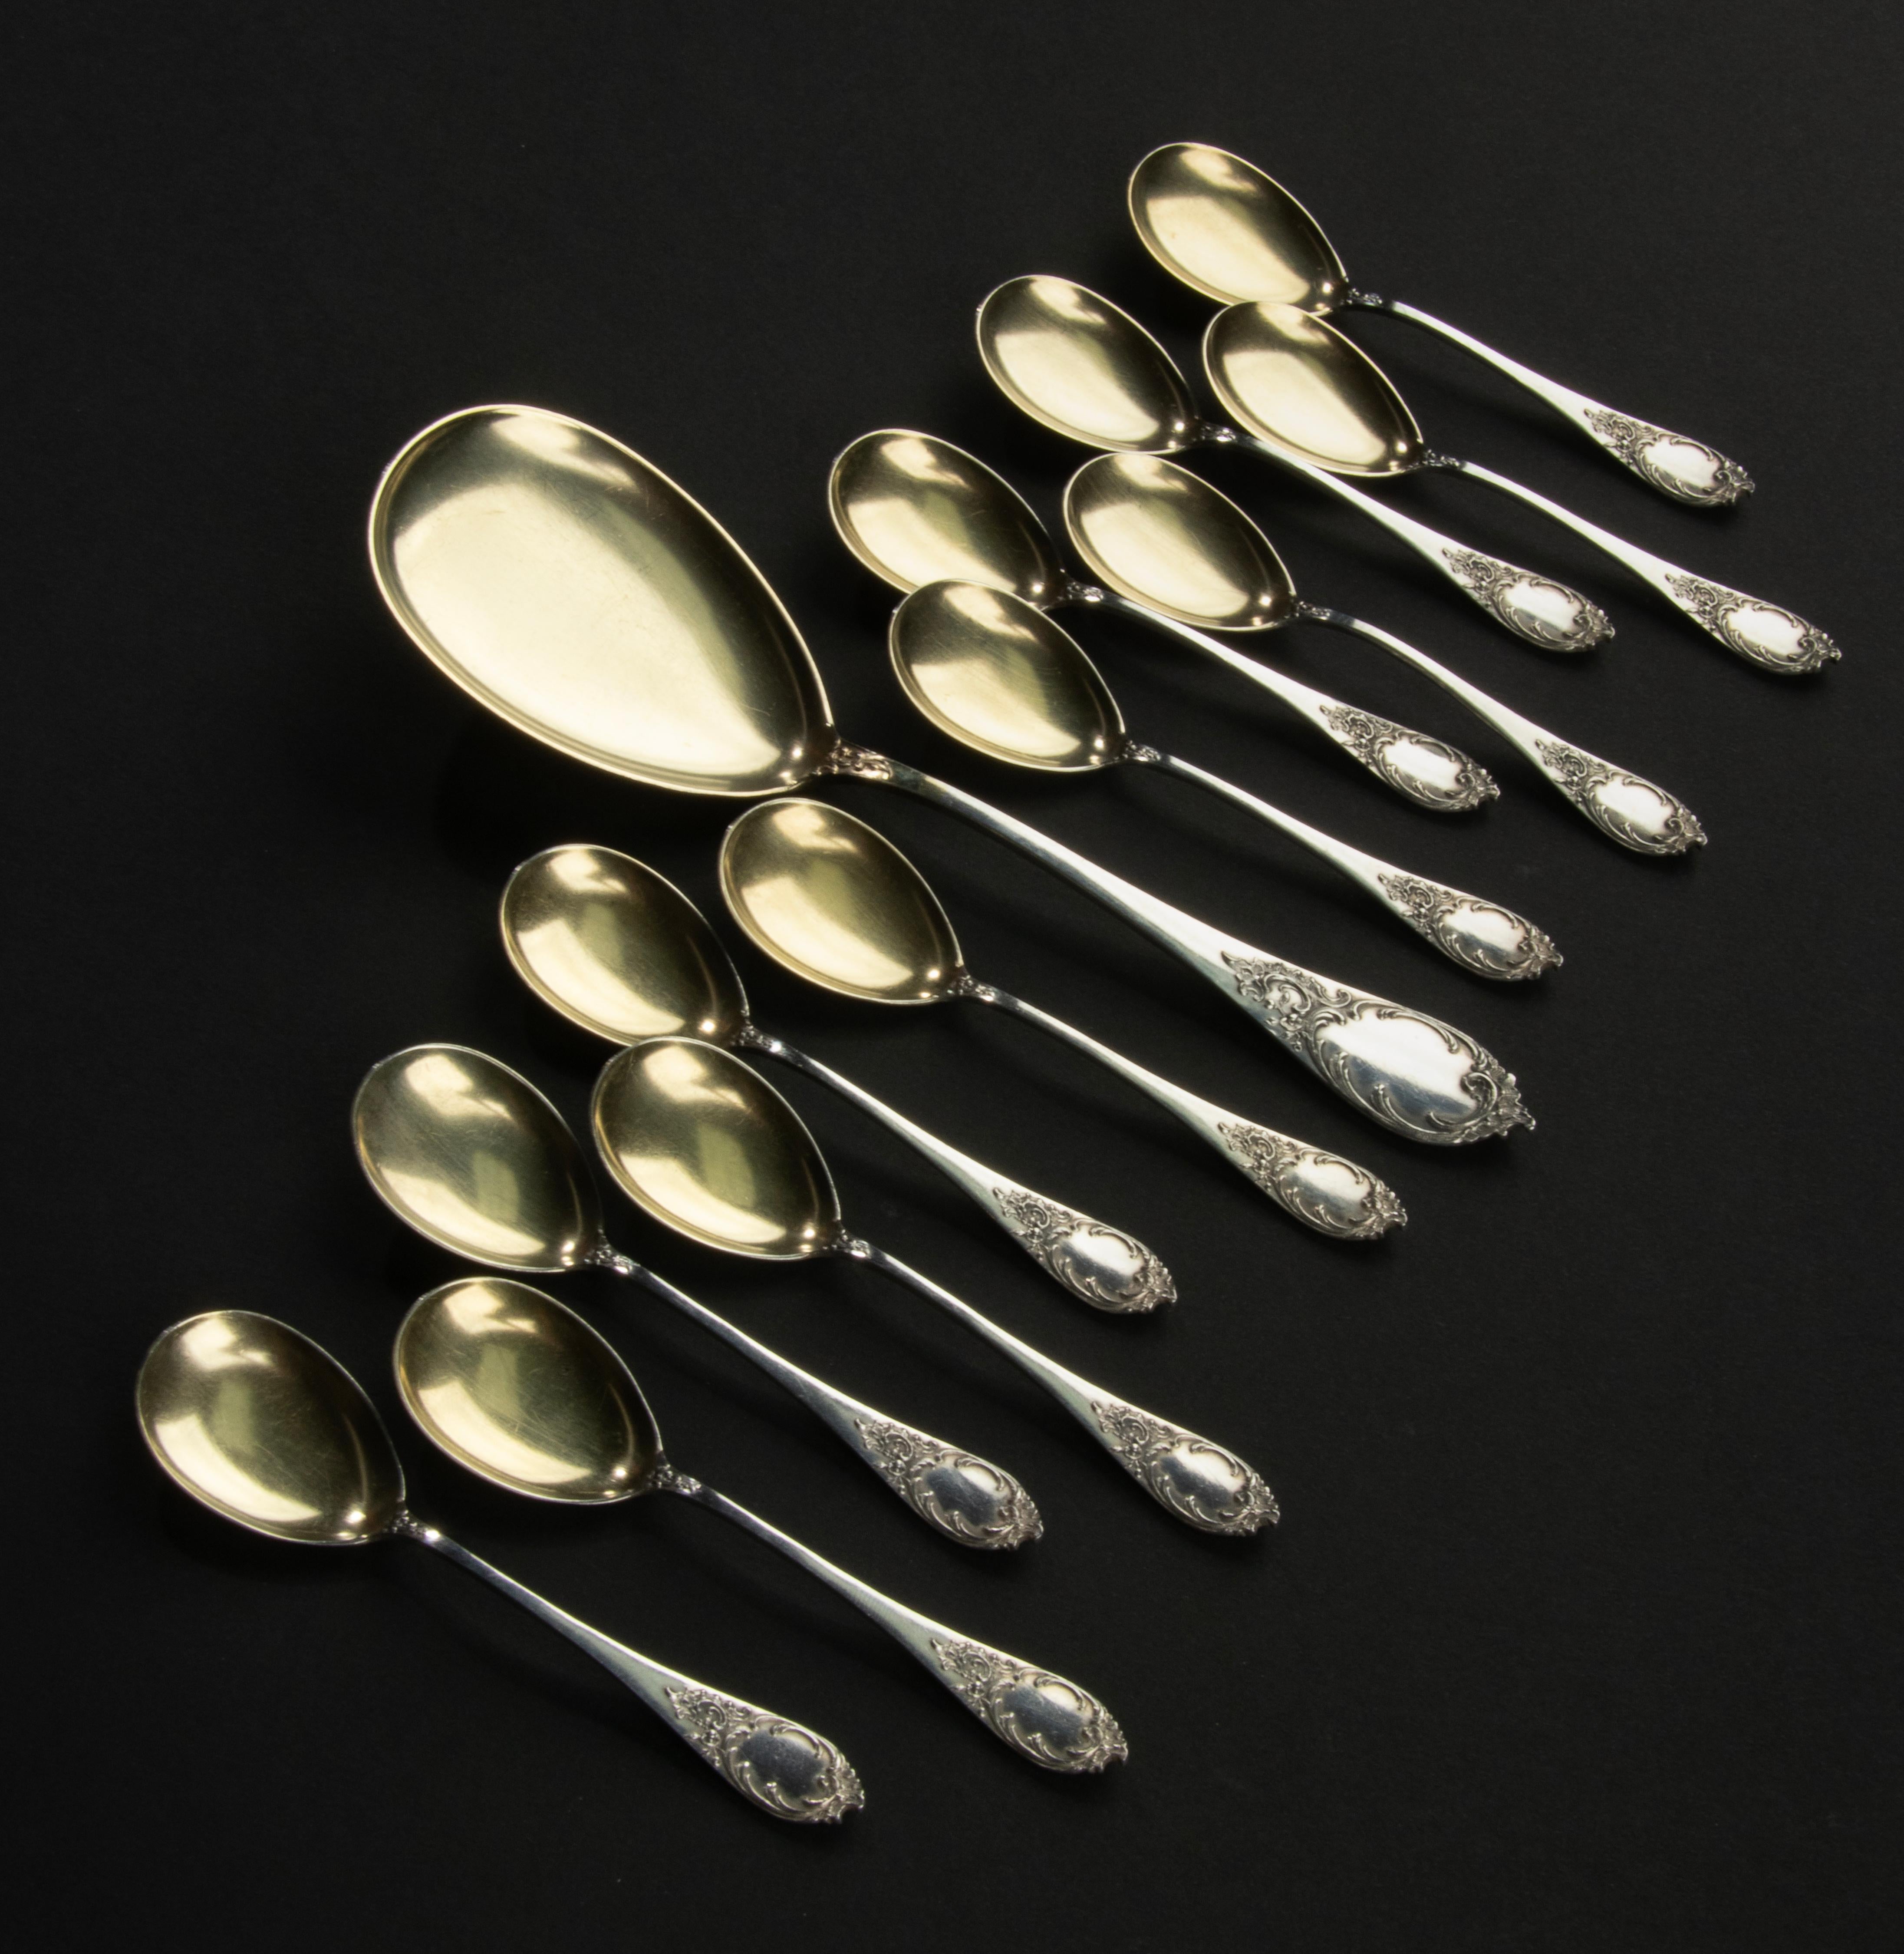 A lovely set of 12 silver ice cream spoons with a matching serving spoon. This cutlery is presumably French, dating from circa 1890-1900. The spoons are marked 800.
The scoops are gilded. The set is in very nice condition.